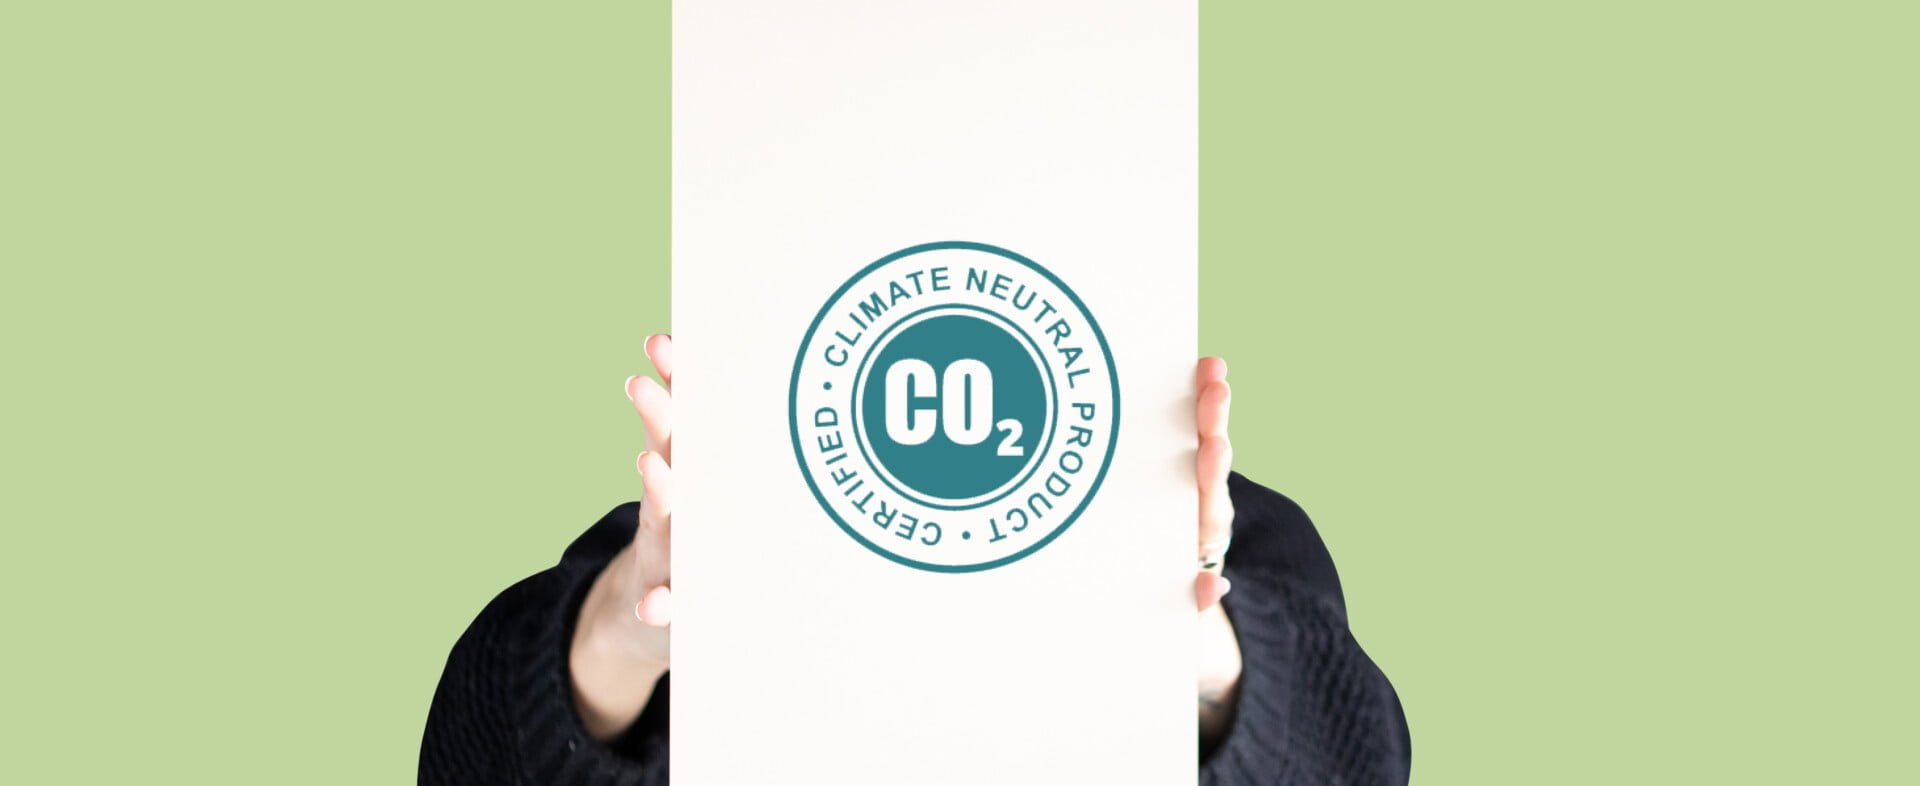 PAPERWISE IS CO2 NEUTRAL: WHAT’S UP WITH THAT?